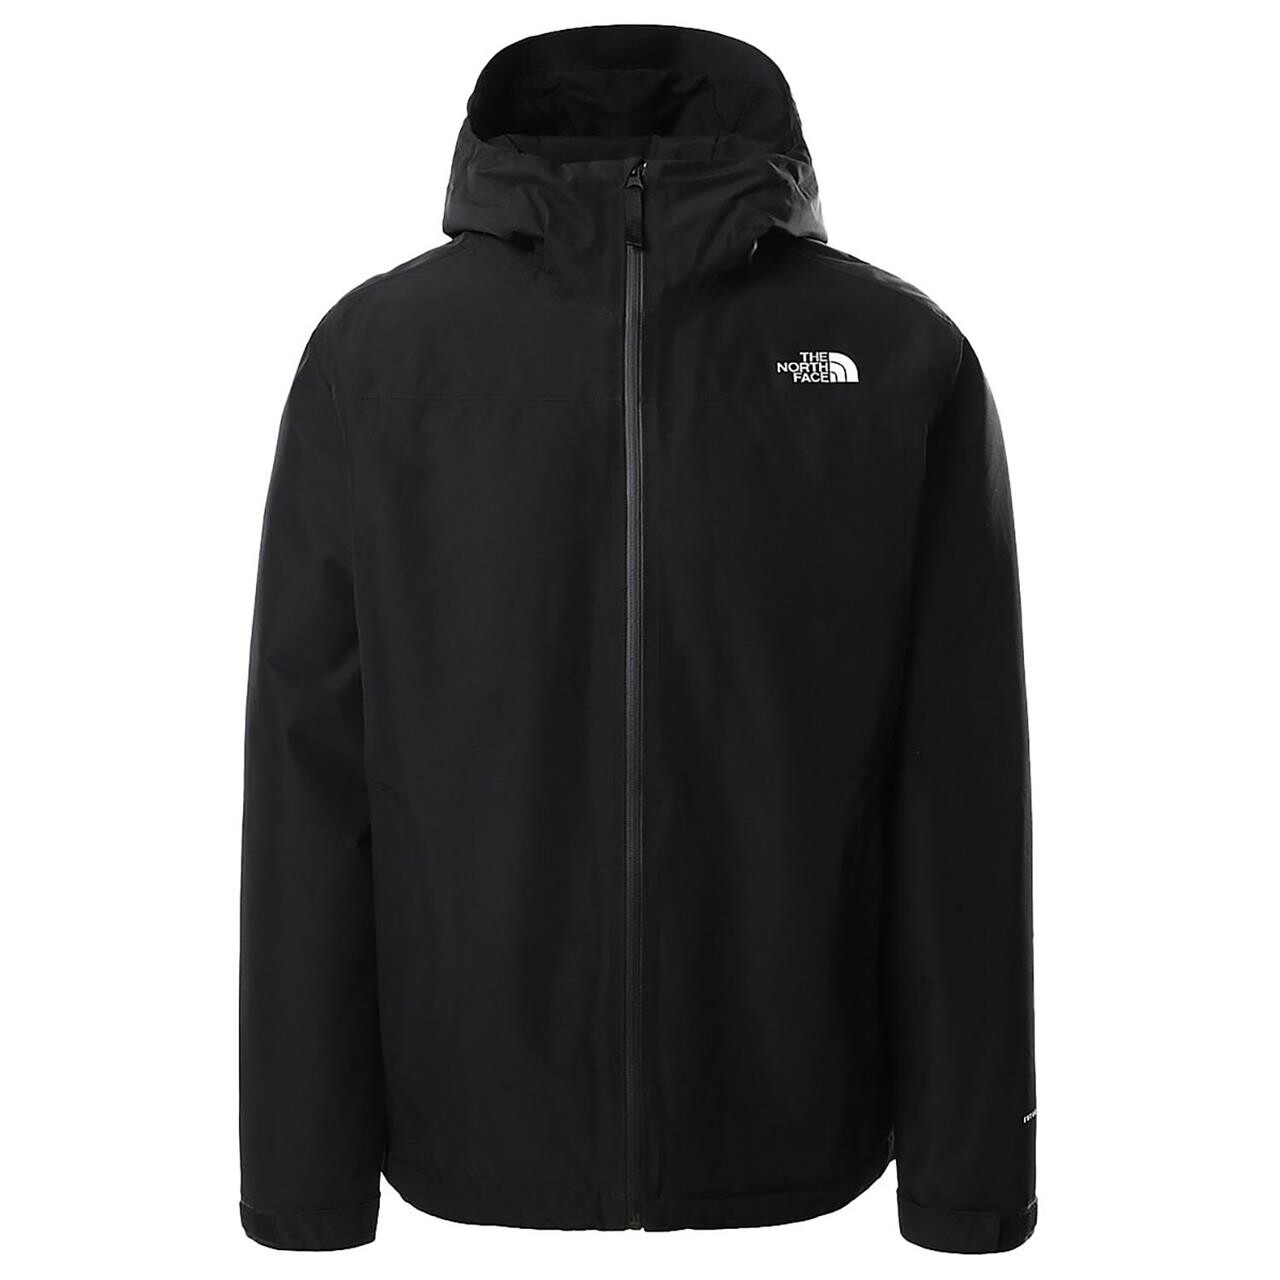 Billede af The North Face Mens Dryzzle Insulated Futurelight Jacket (Sort (TNF BLACK) Small)